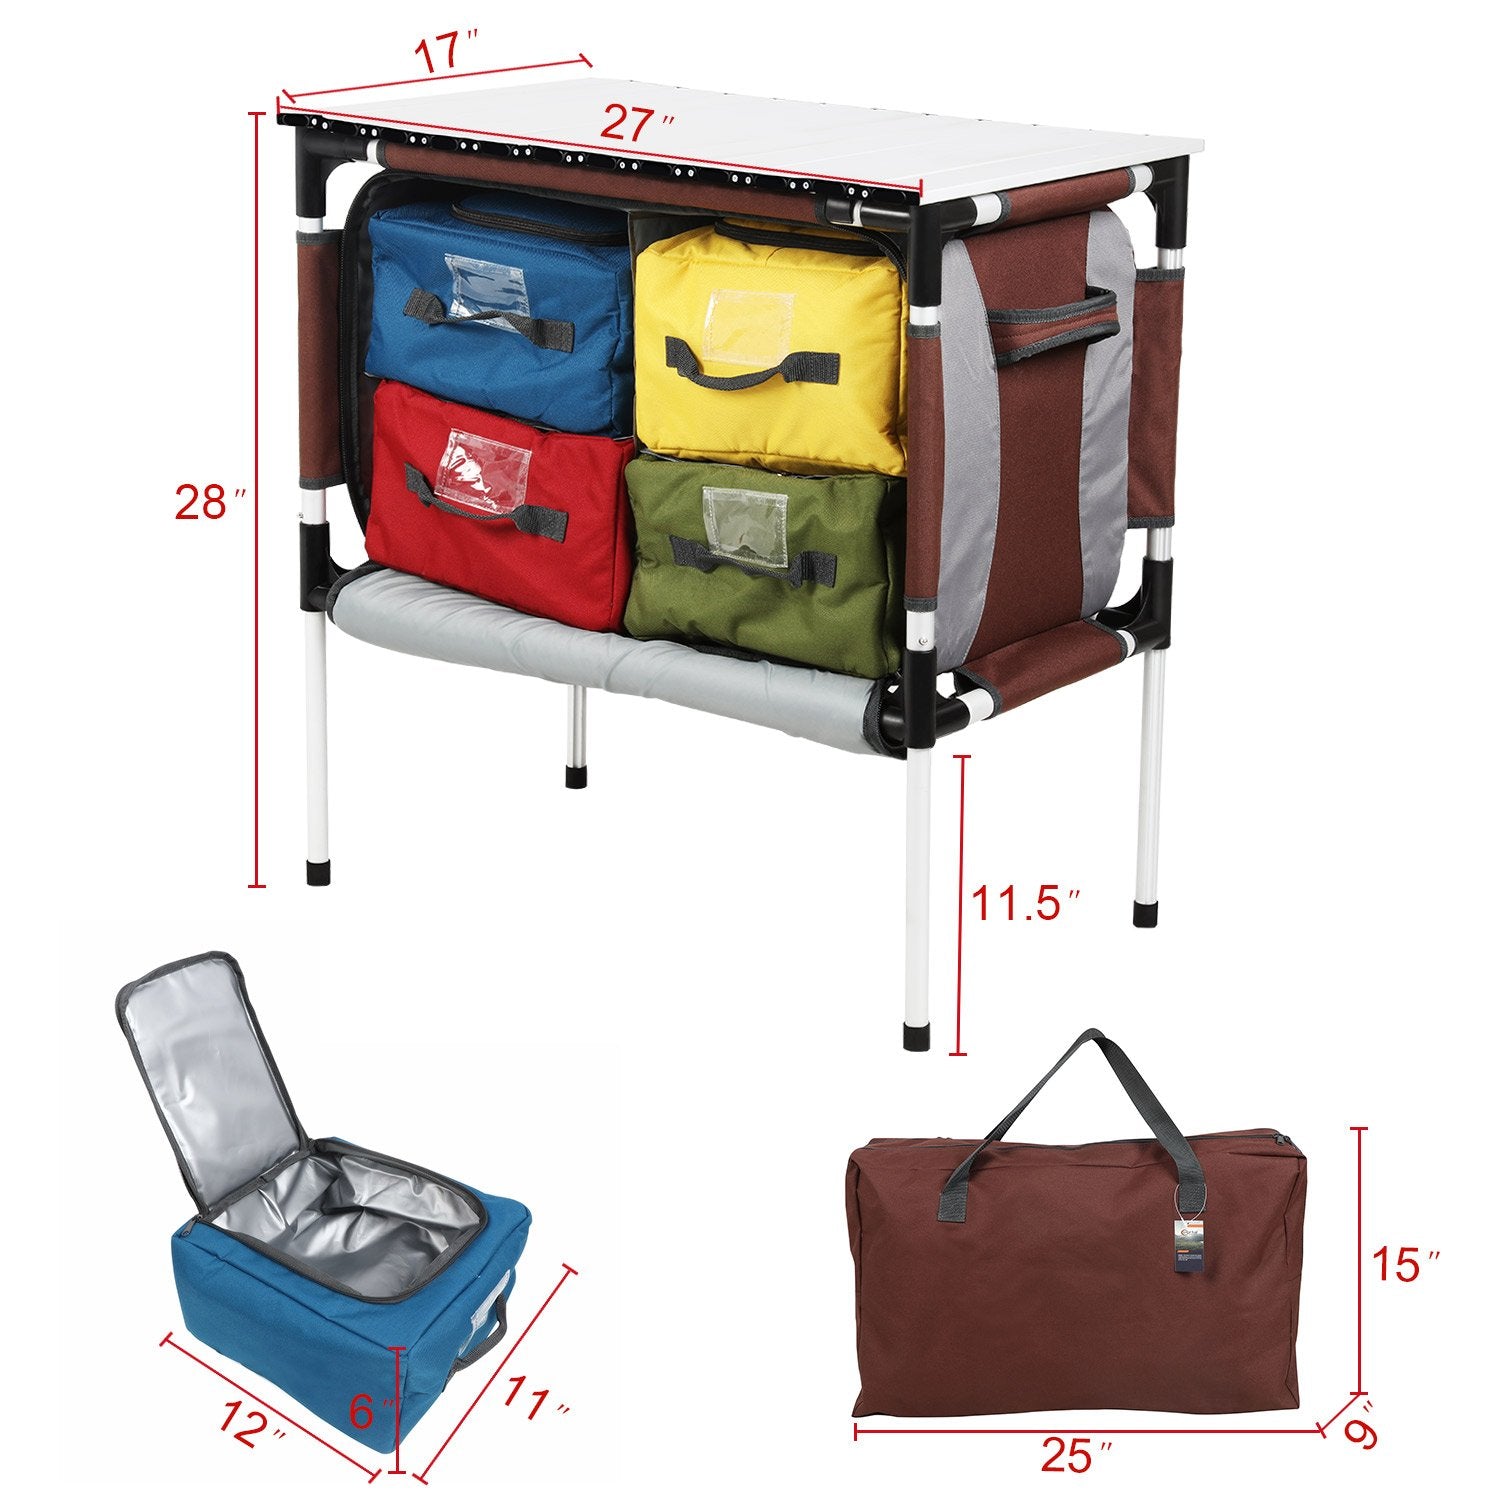 PORTAL Multifunctional Folding Camp Table Aluminum Lightweight Picnic Organizer with Large Zippered Compartment contains Cooler Storage Bags for BBQ, Party, Camping, Kitchen